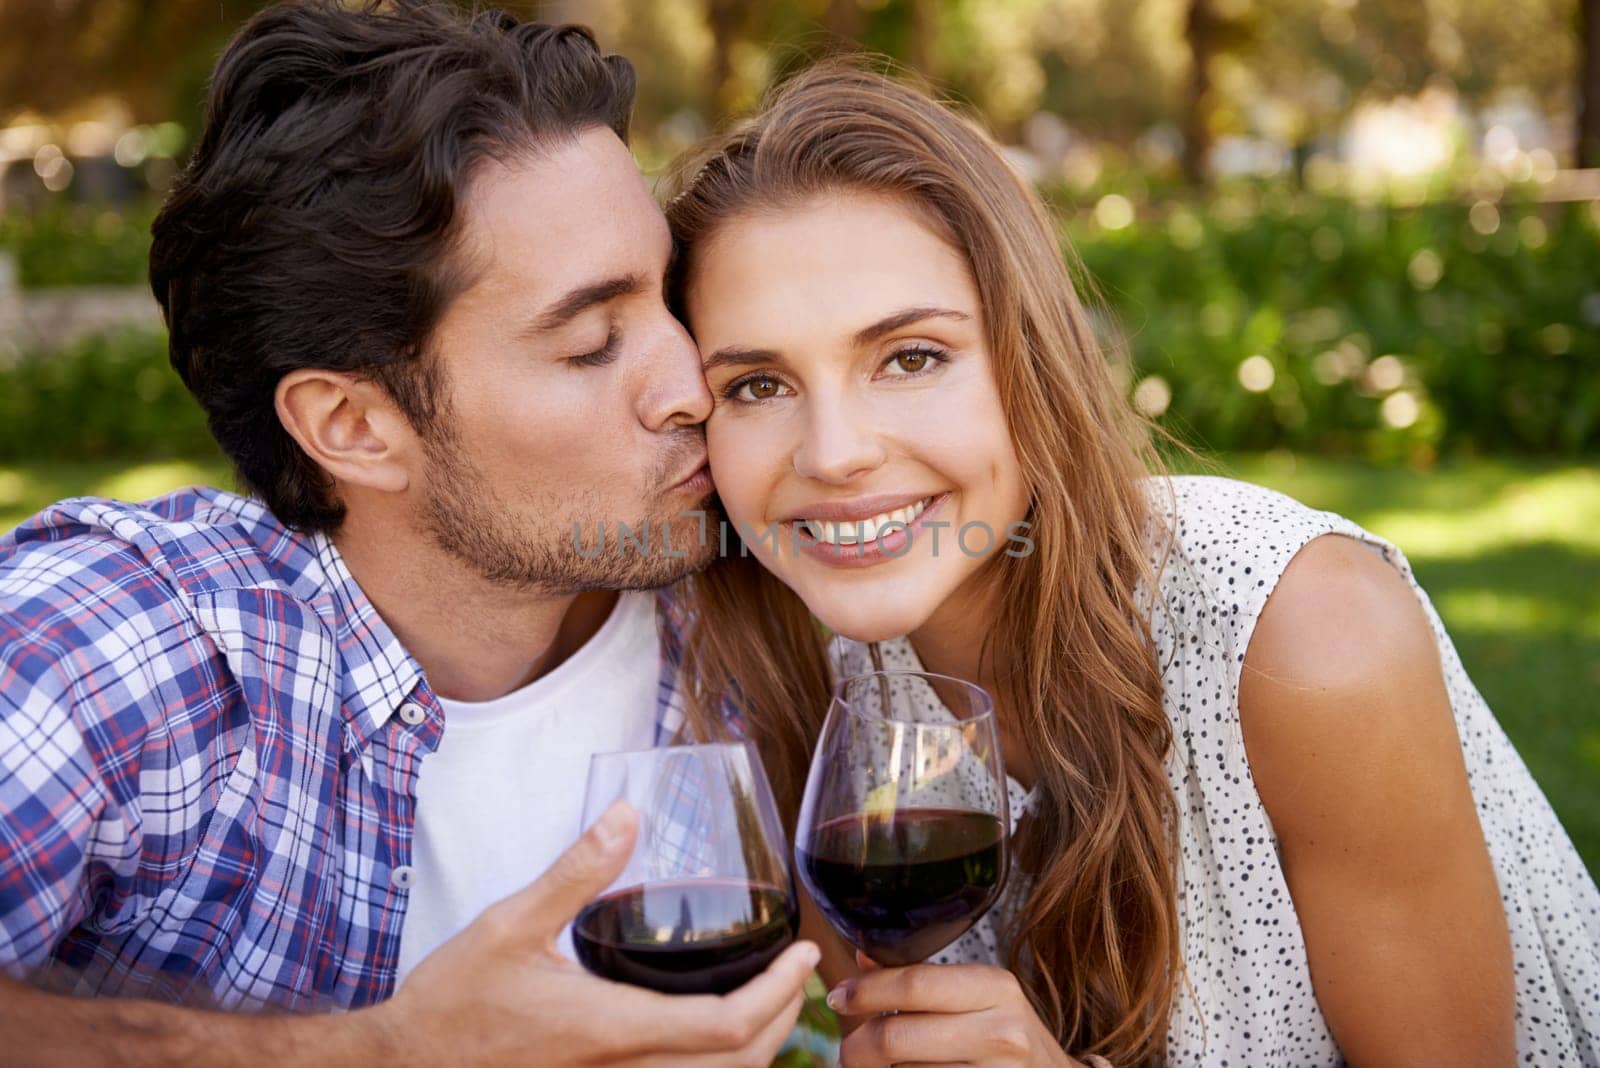 Couple portrait, wine or cheek kiss on picnic date, valentines day or romance bonding in nature, park or garden. Smile, happy woman and man with alcohol drinks glass for love anniversary celebration.